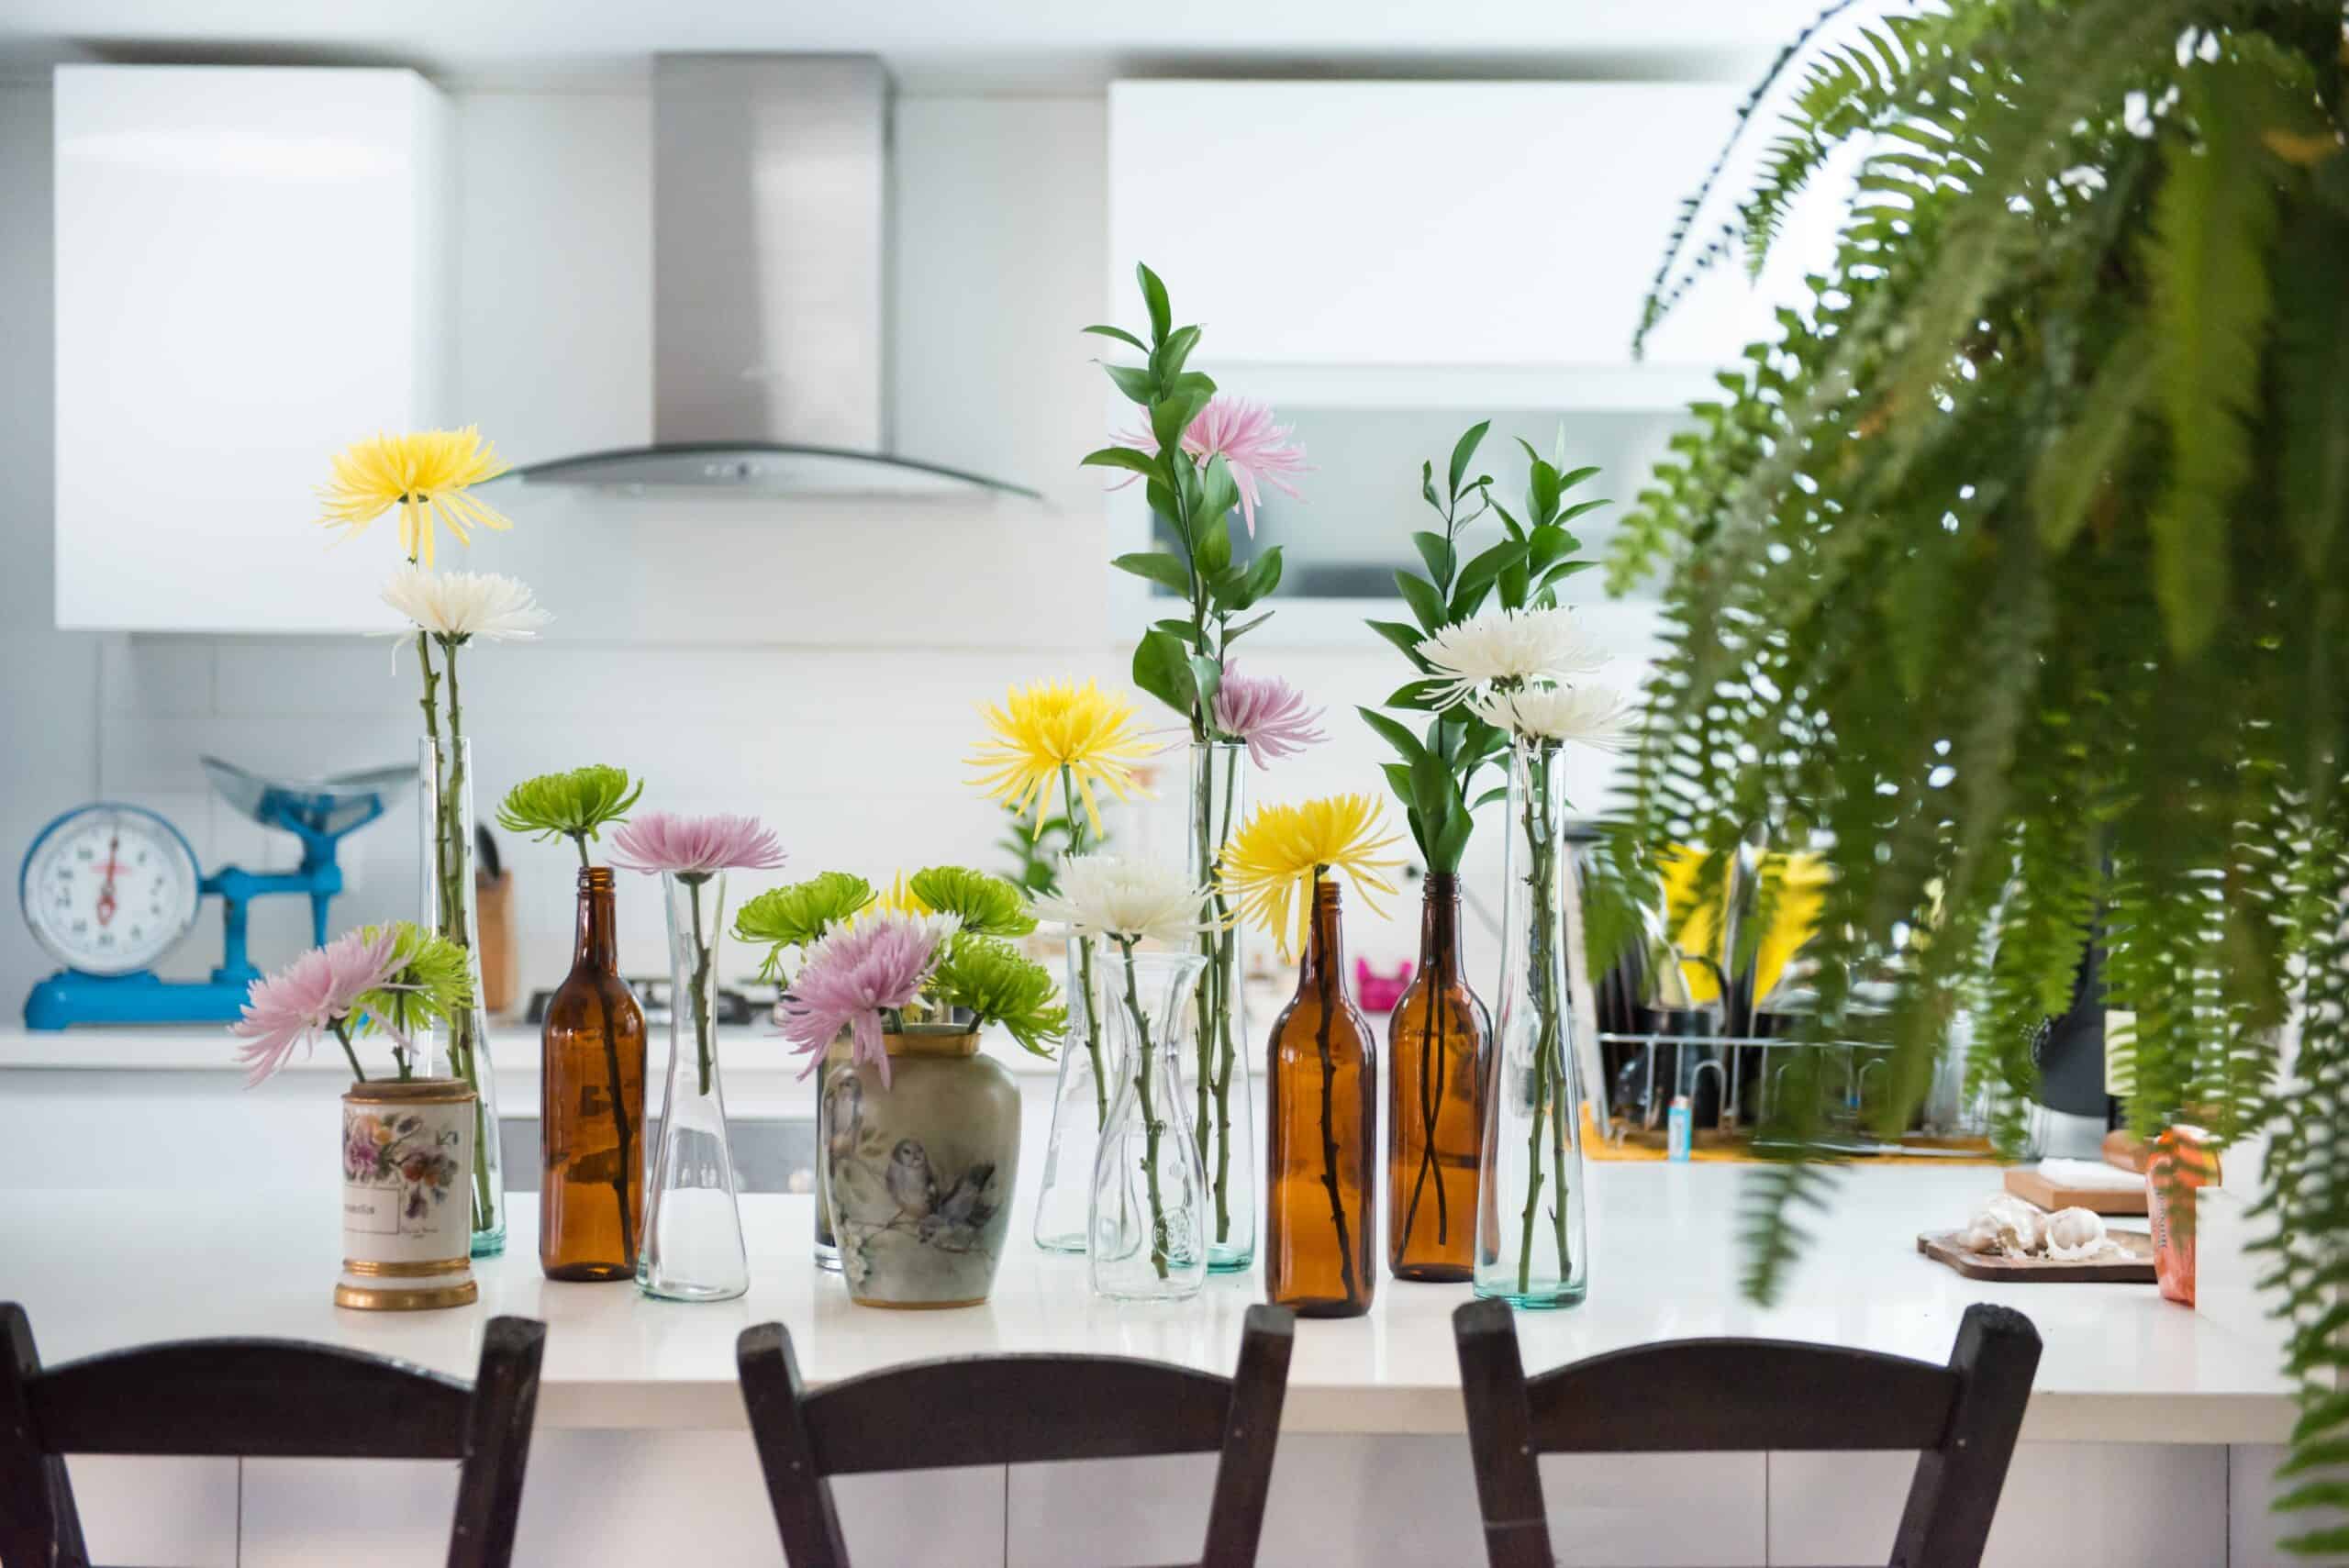 How to Use Flowers in Your Home Decor